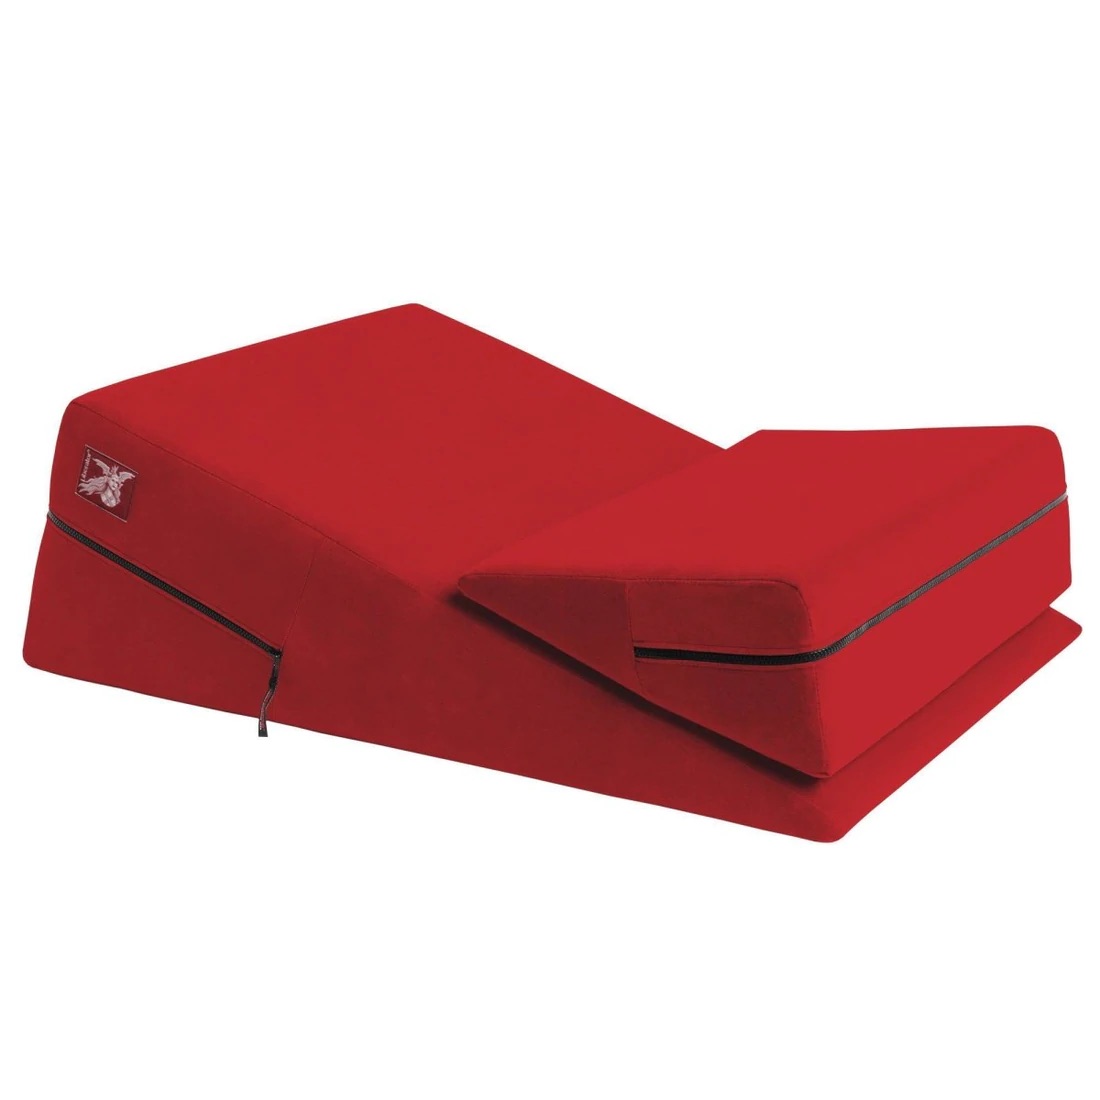 The Liberator Wedge/Ramp Combo: A large red foam wedge with a smaller foam wedge at its thinner end. The thick end of the smaller wedge is aligned on top of the thinnest part of the larger wedge.